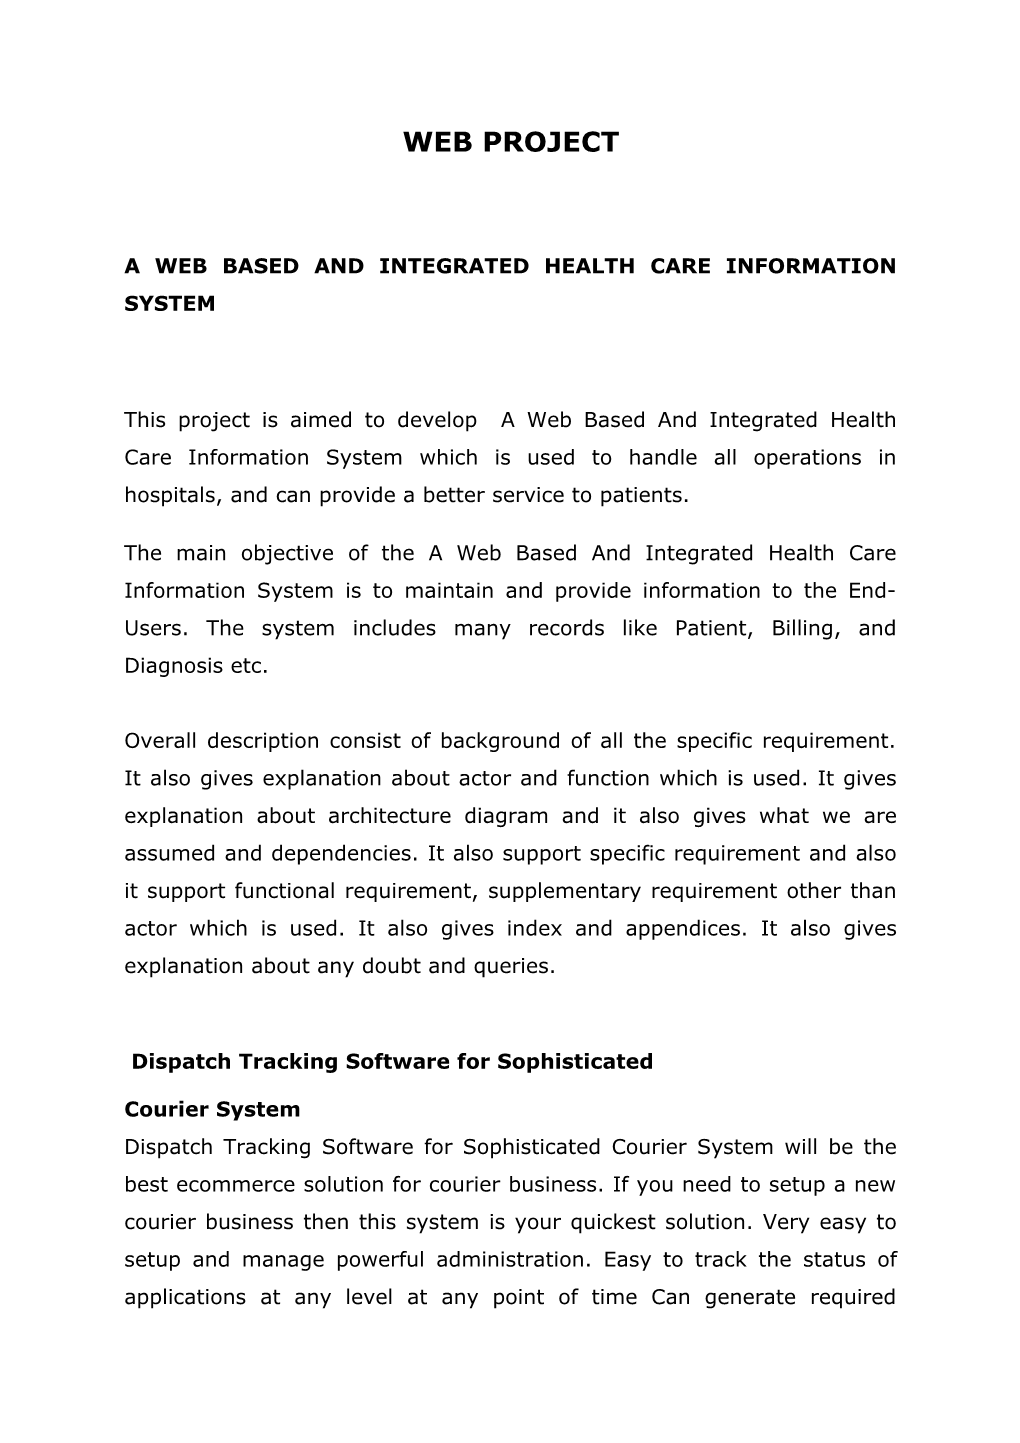 A Web Based and Integrated Health Care Information System